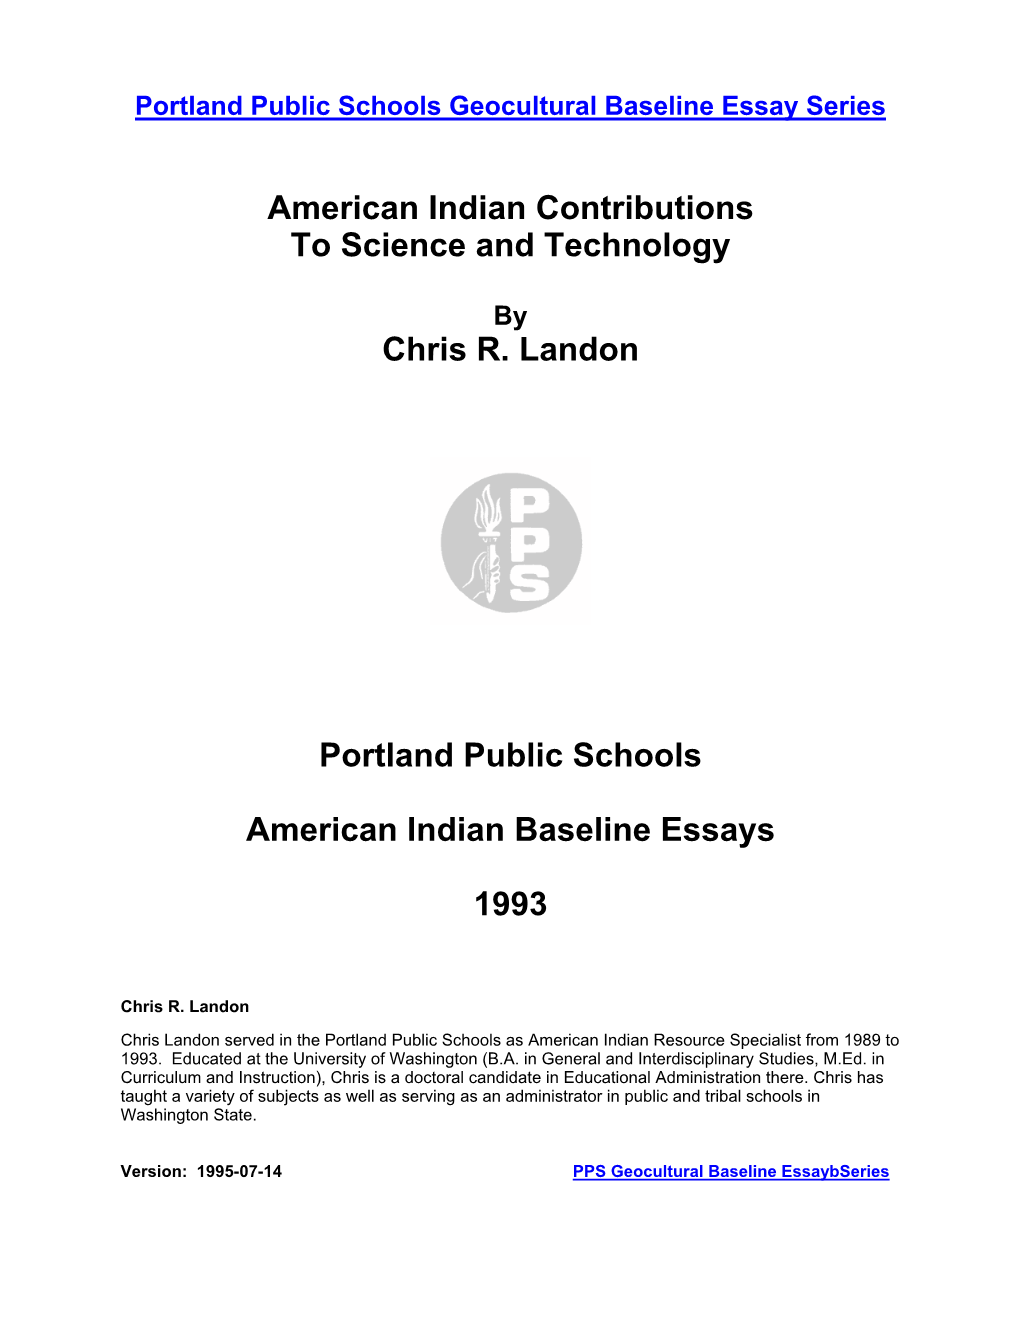 American Indian Contributions to Science and Technology